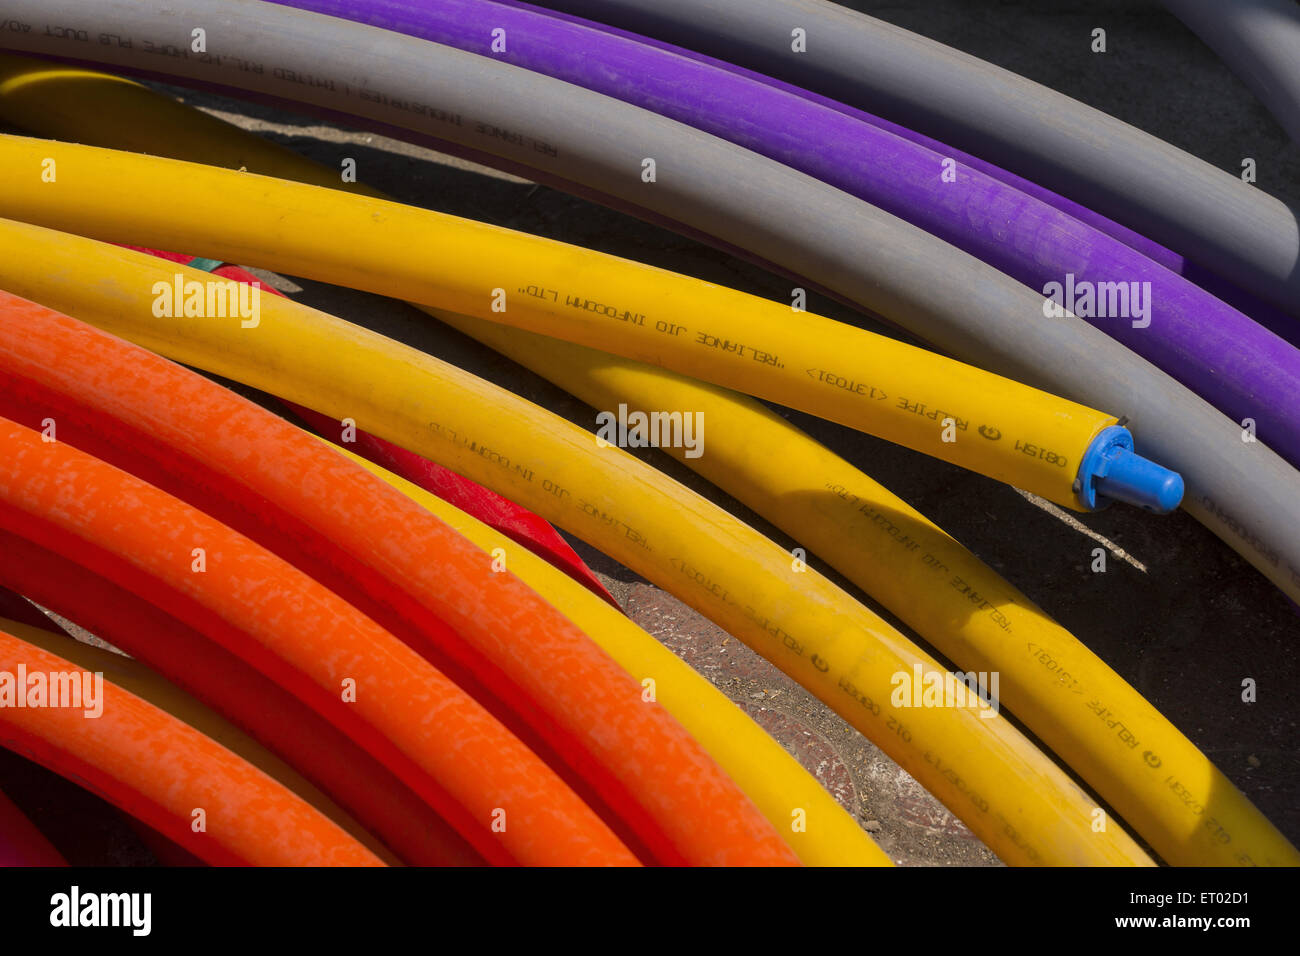 Reliance 4G Network Multi Color PVC Pipes India Asia Stock Photo